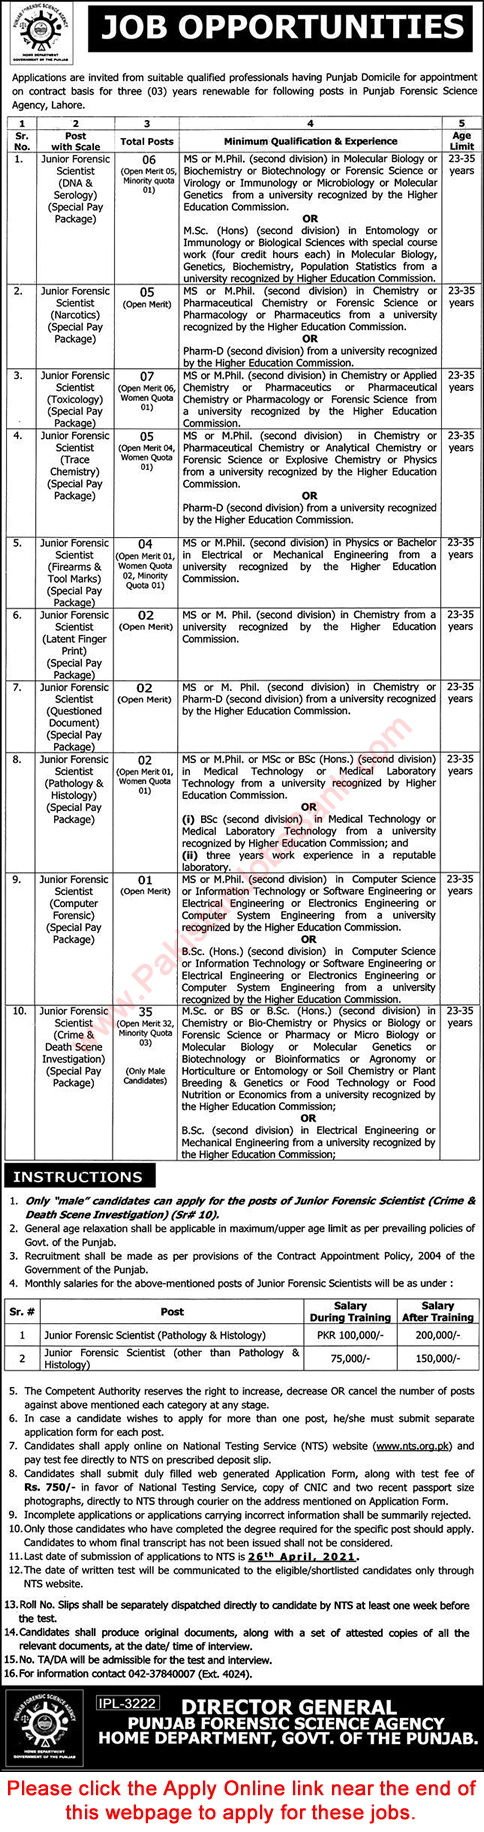 Junior Forensic Scientist Jobs in Punjab Forensic Science Agency Lahore April 2021 NTS Apply Online Latest